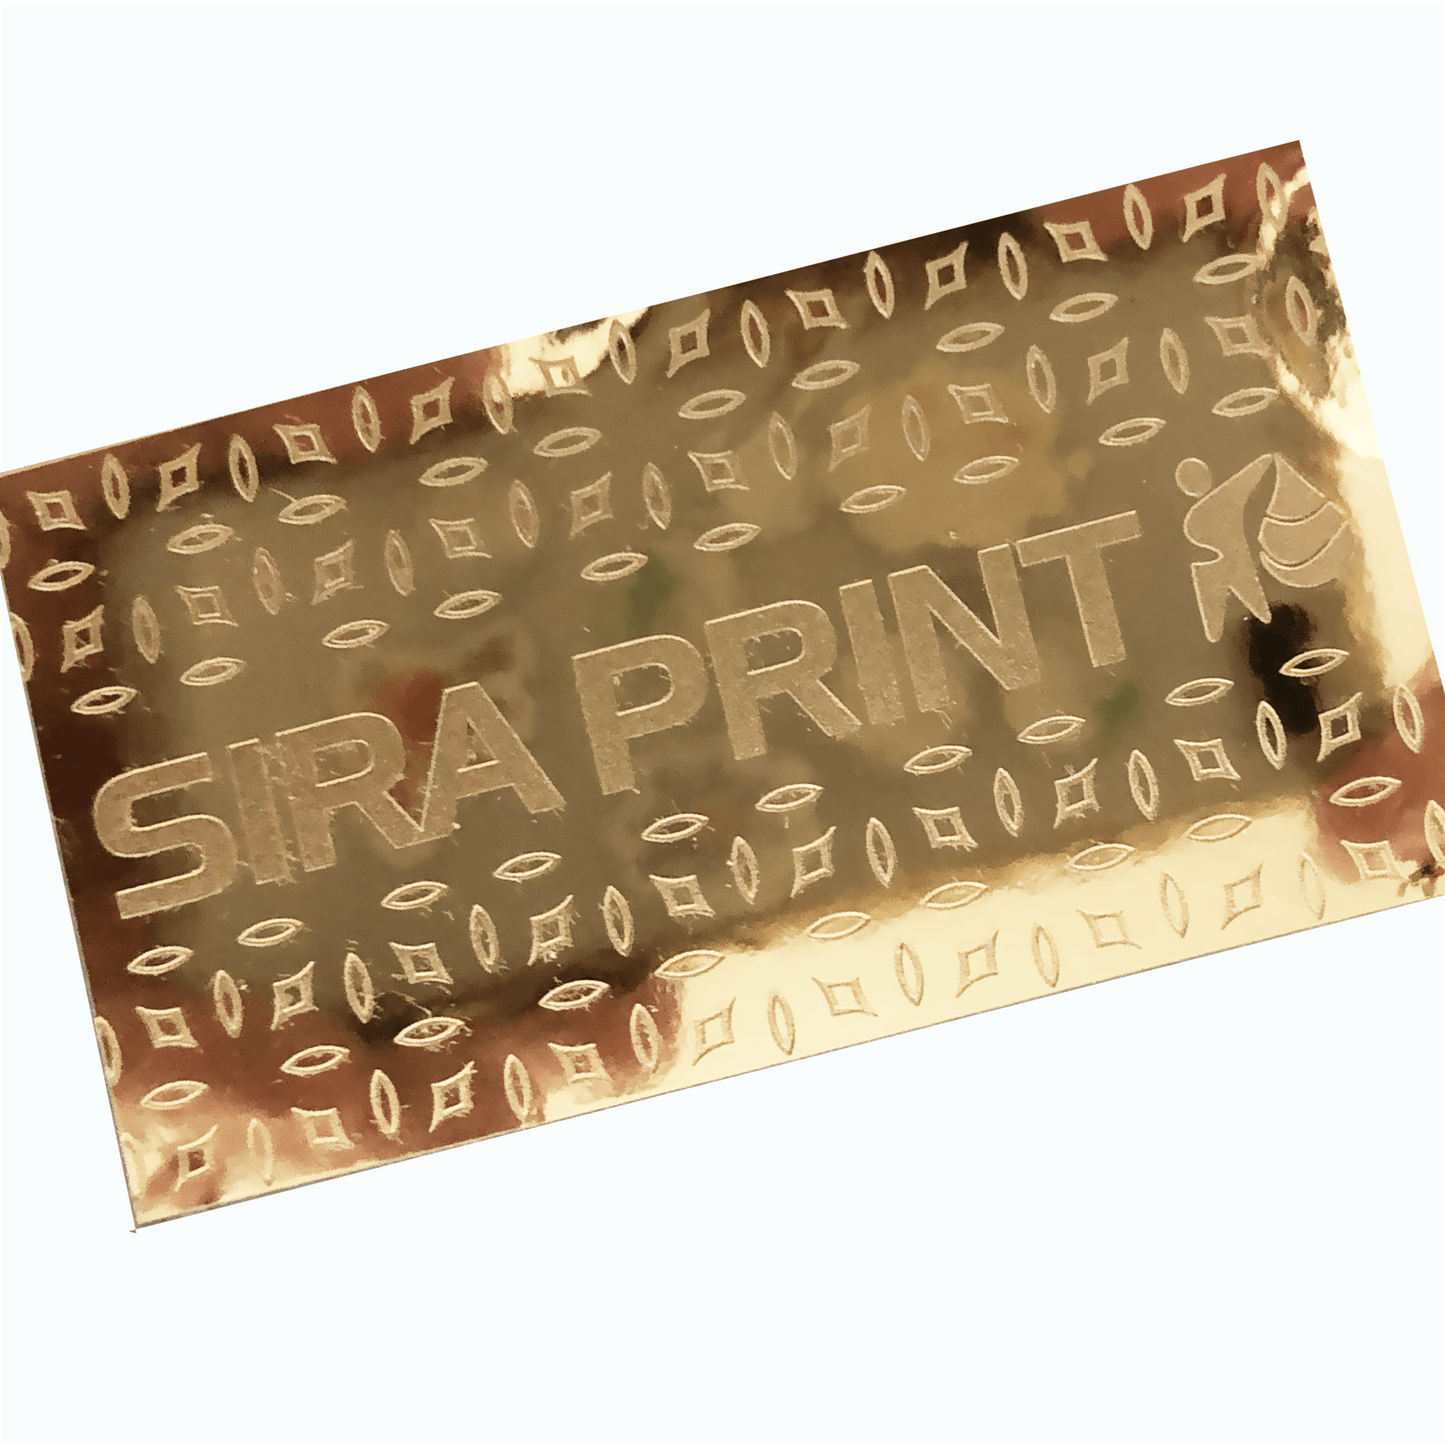 Etched-Like On Gold, etching effect on gold vinyl with mirror finish